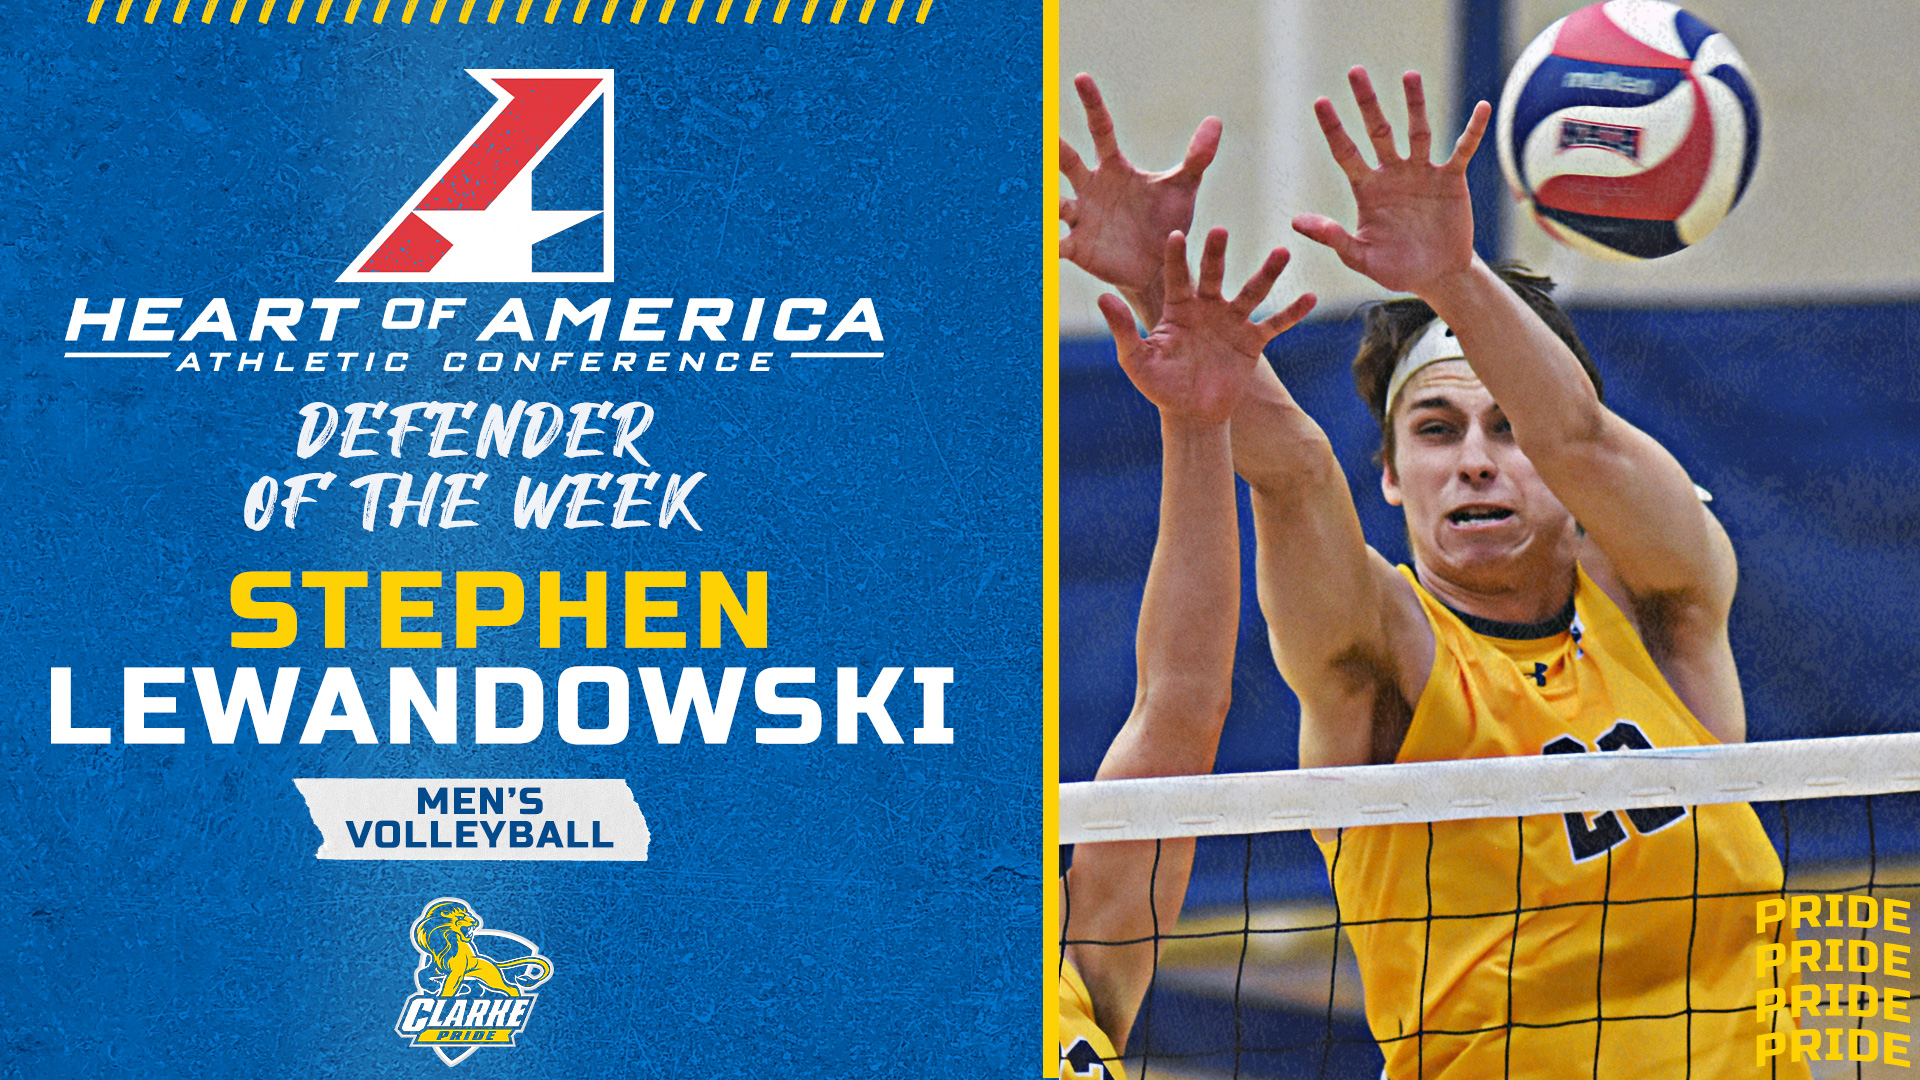 Heart of America Athletic Conference
Defender of the Week
Stephen Lewandowski
Men's Volleyball